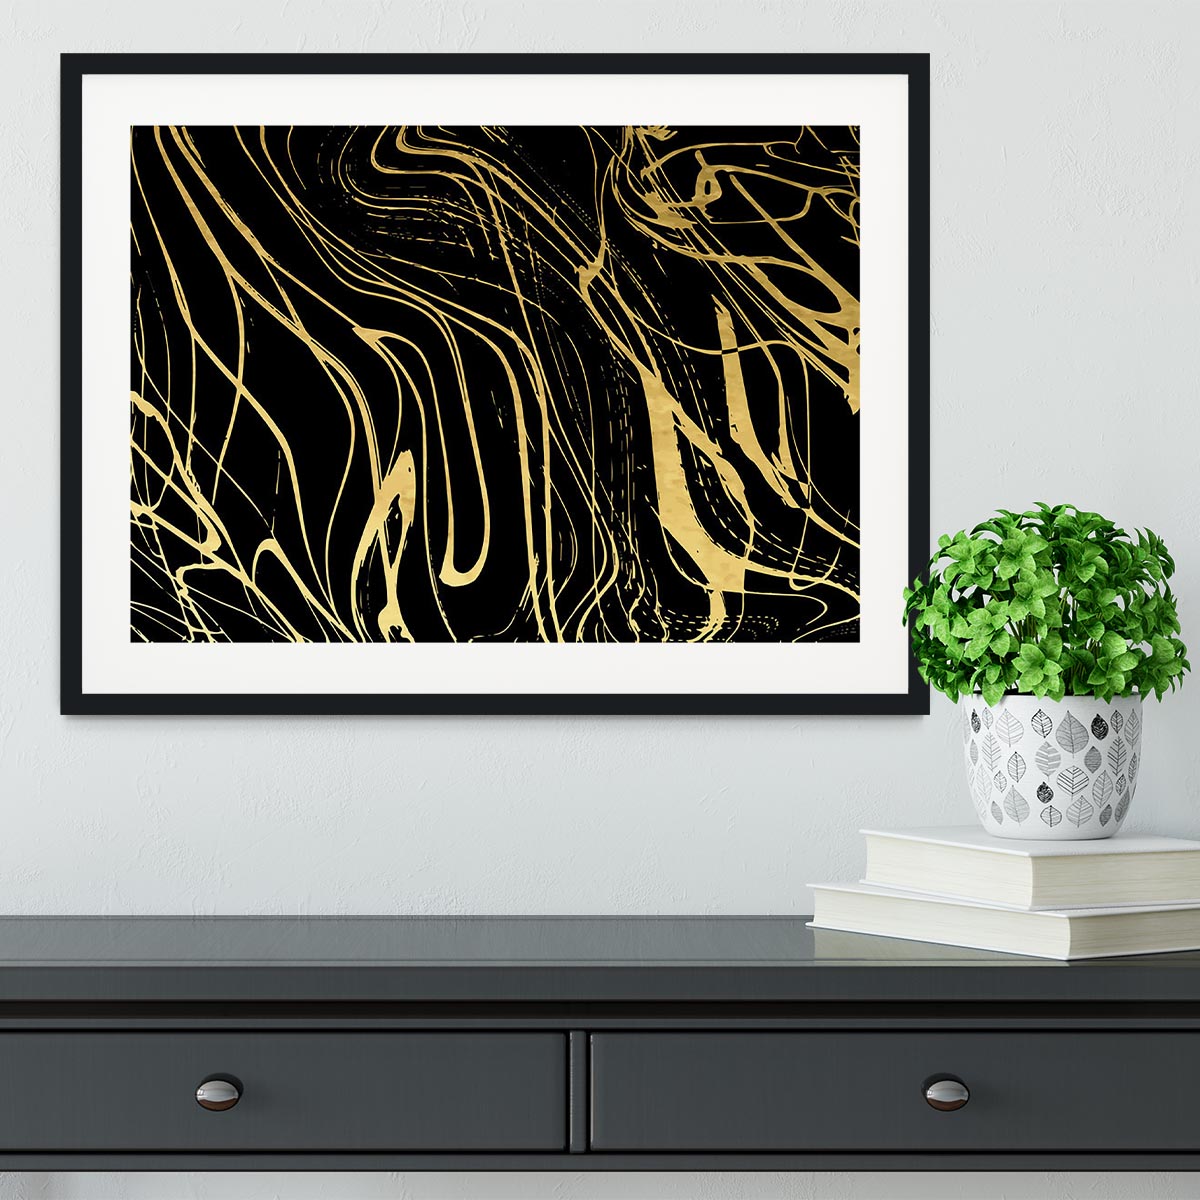 Black and Gold Swirled Abstract Framed Print - Canvas Art Rocks - 1